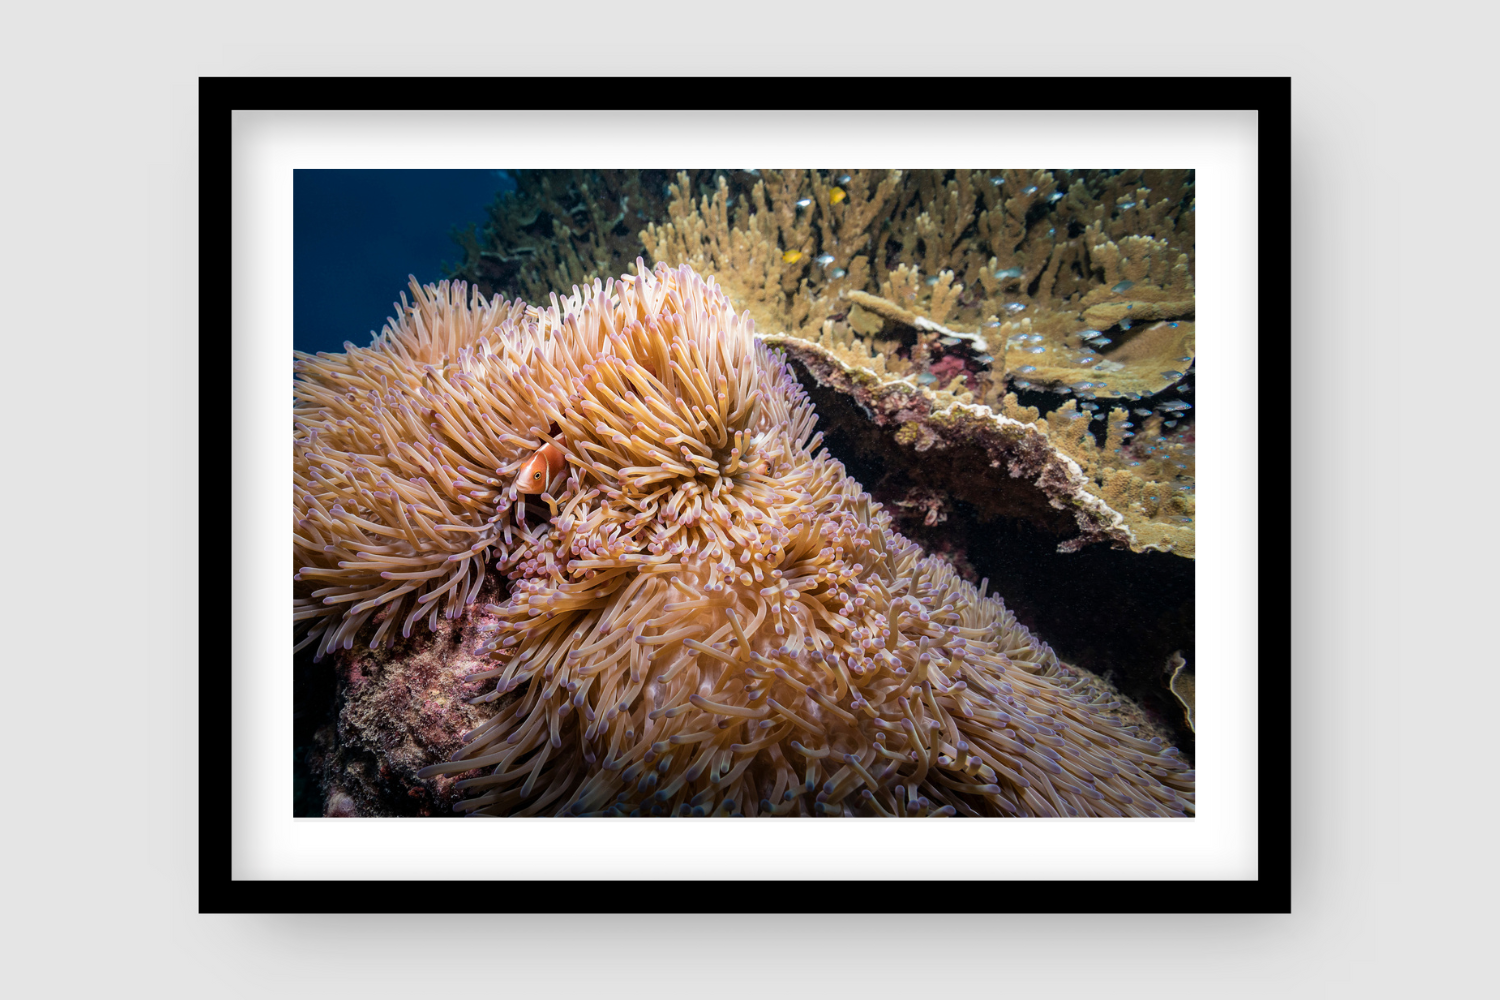 orange and purple fluffy swirling anemone with a clown fish poking out his head